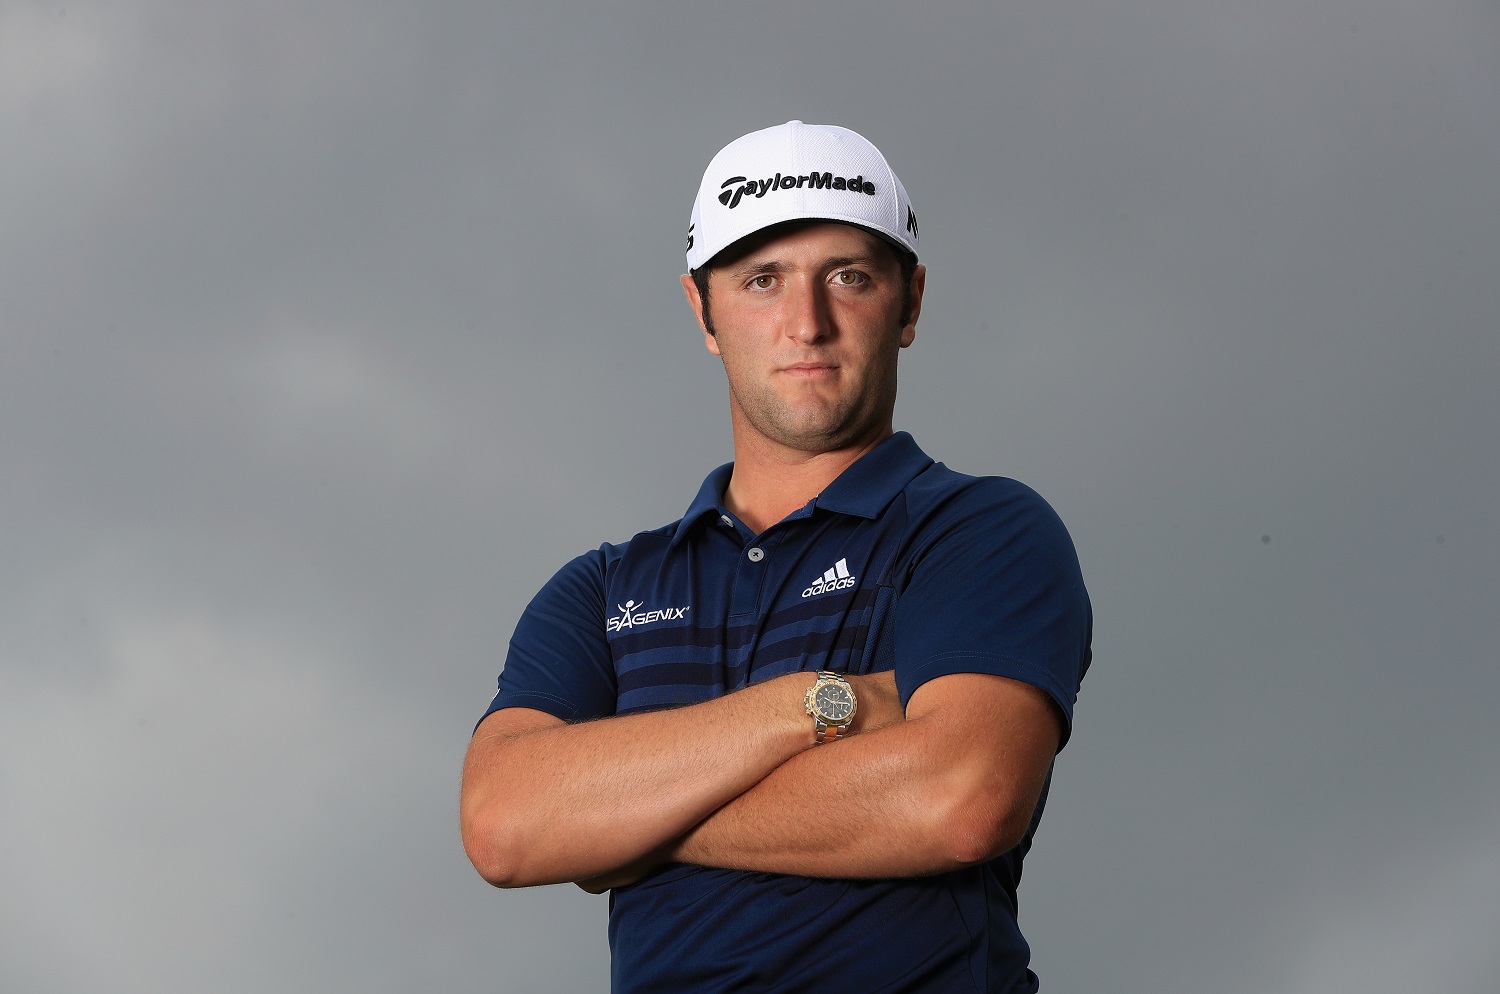 Jon Rahm is positioned to overtake Dustin Johnson for the No. 1 world ranking heading into the 149th British Open. | Andrew Redington/Getty Images